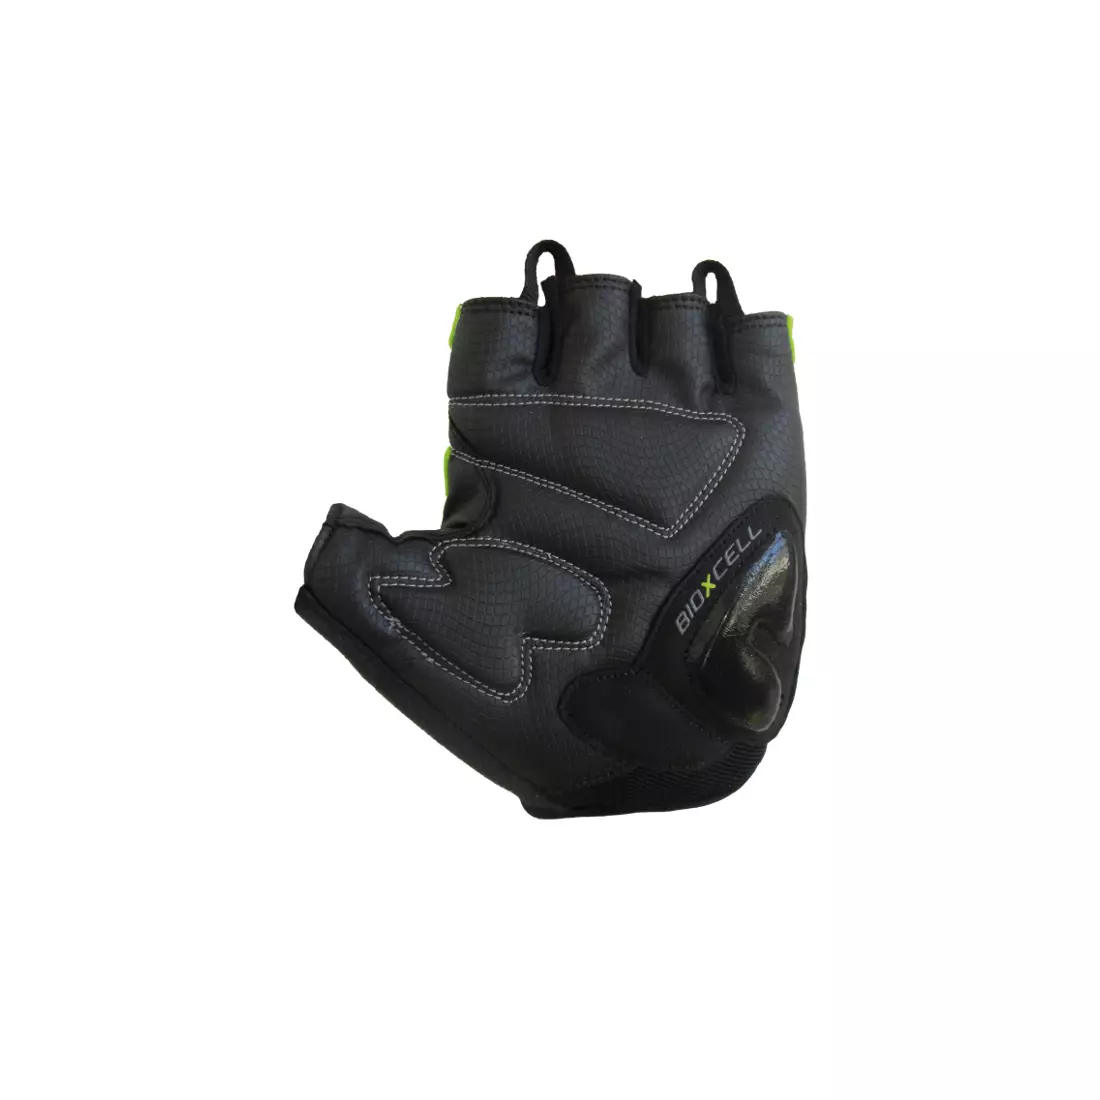 CHIBA cycling gloves BIOXCELL, Red 30617